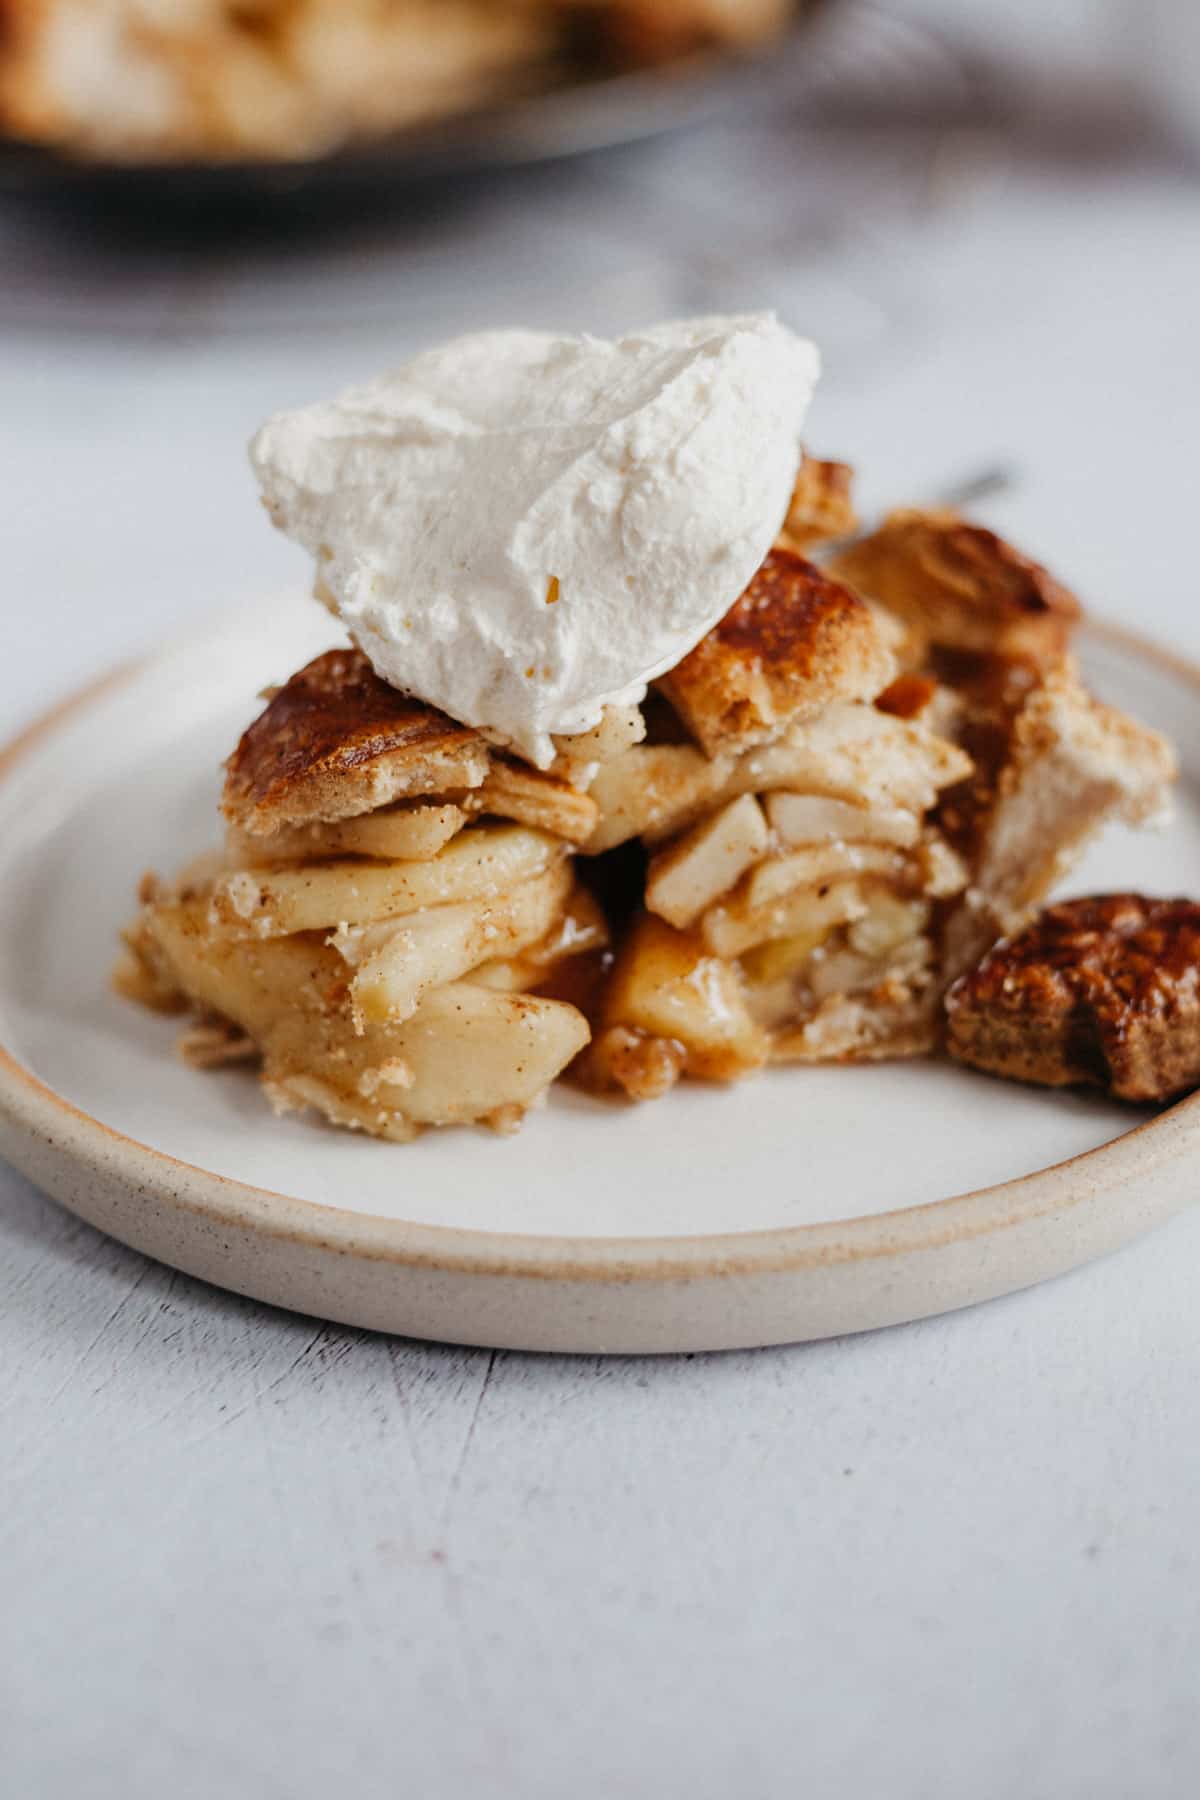 A slice of apple pie with whipped cream on top